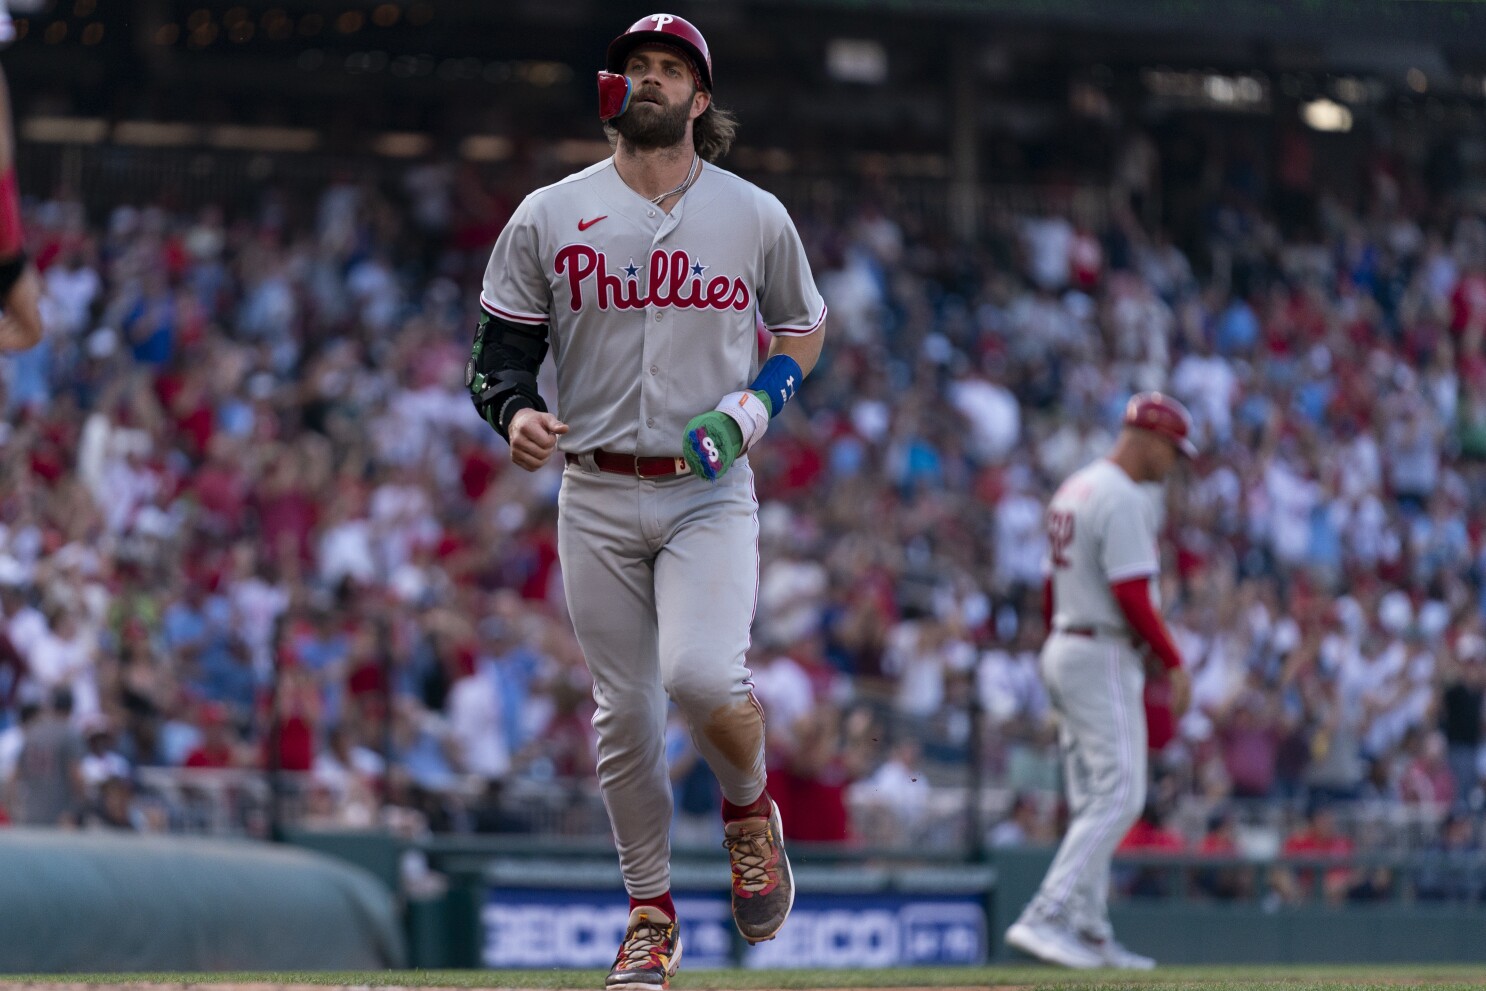 Baseball Players Are Hitting More Home Runs--And Climate Change Is Helping  - Scientific American